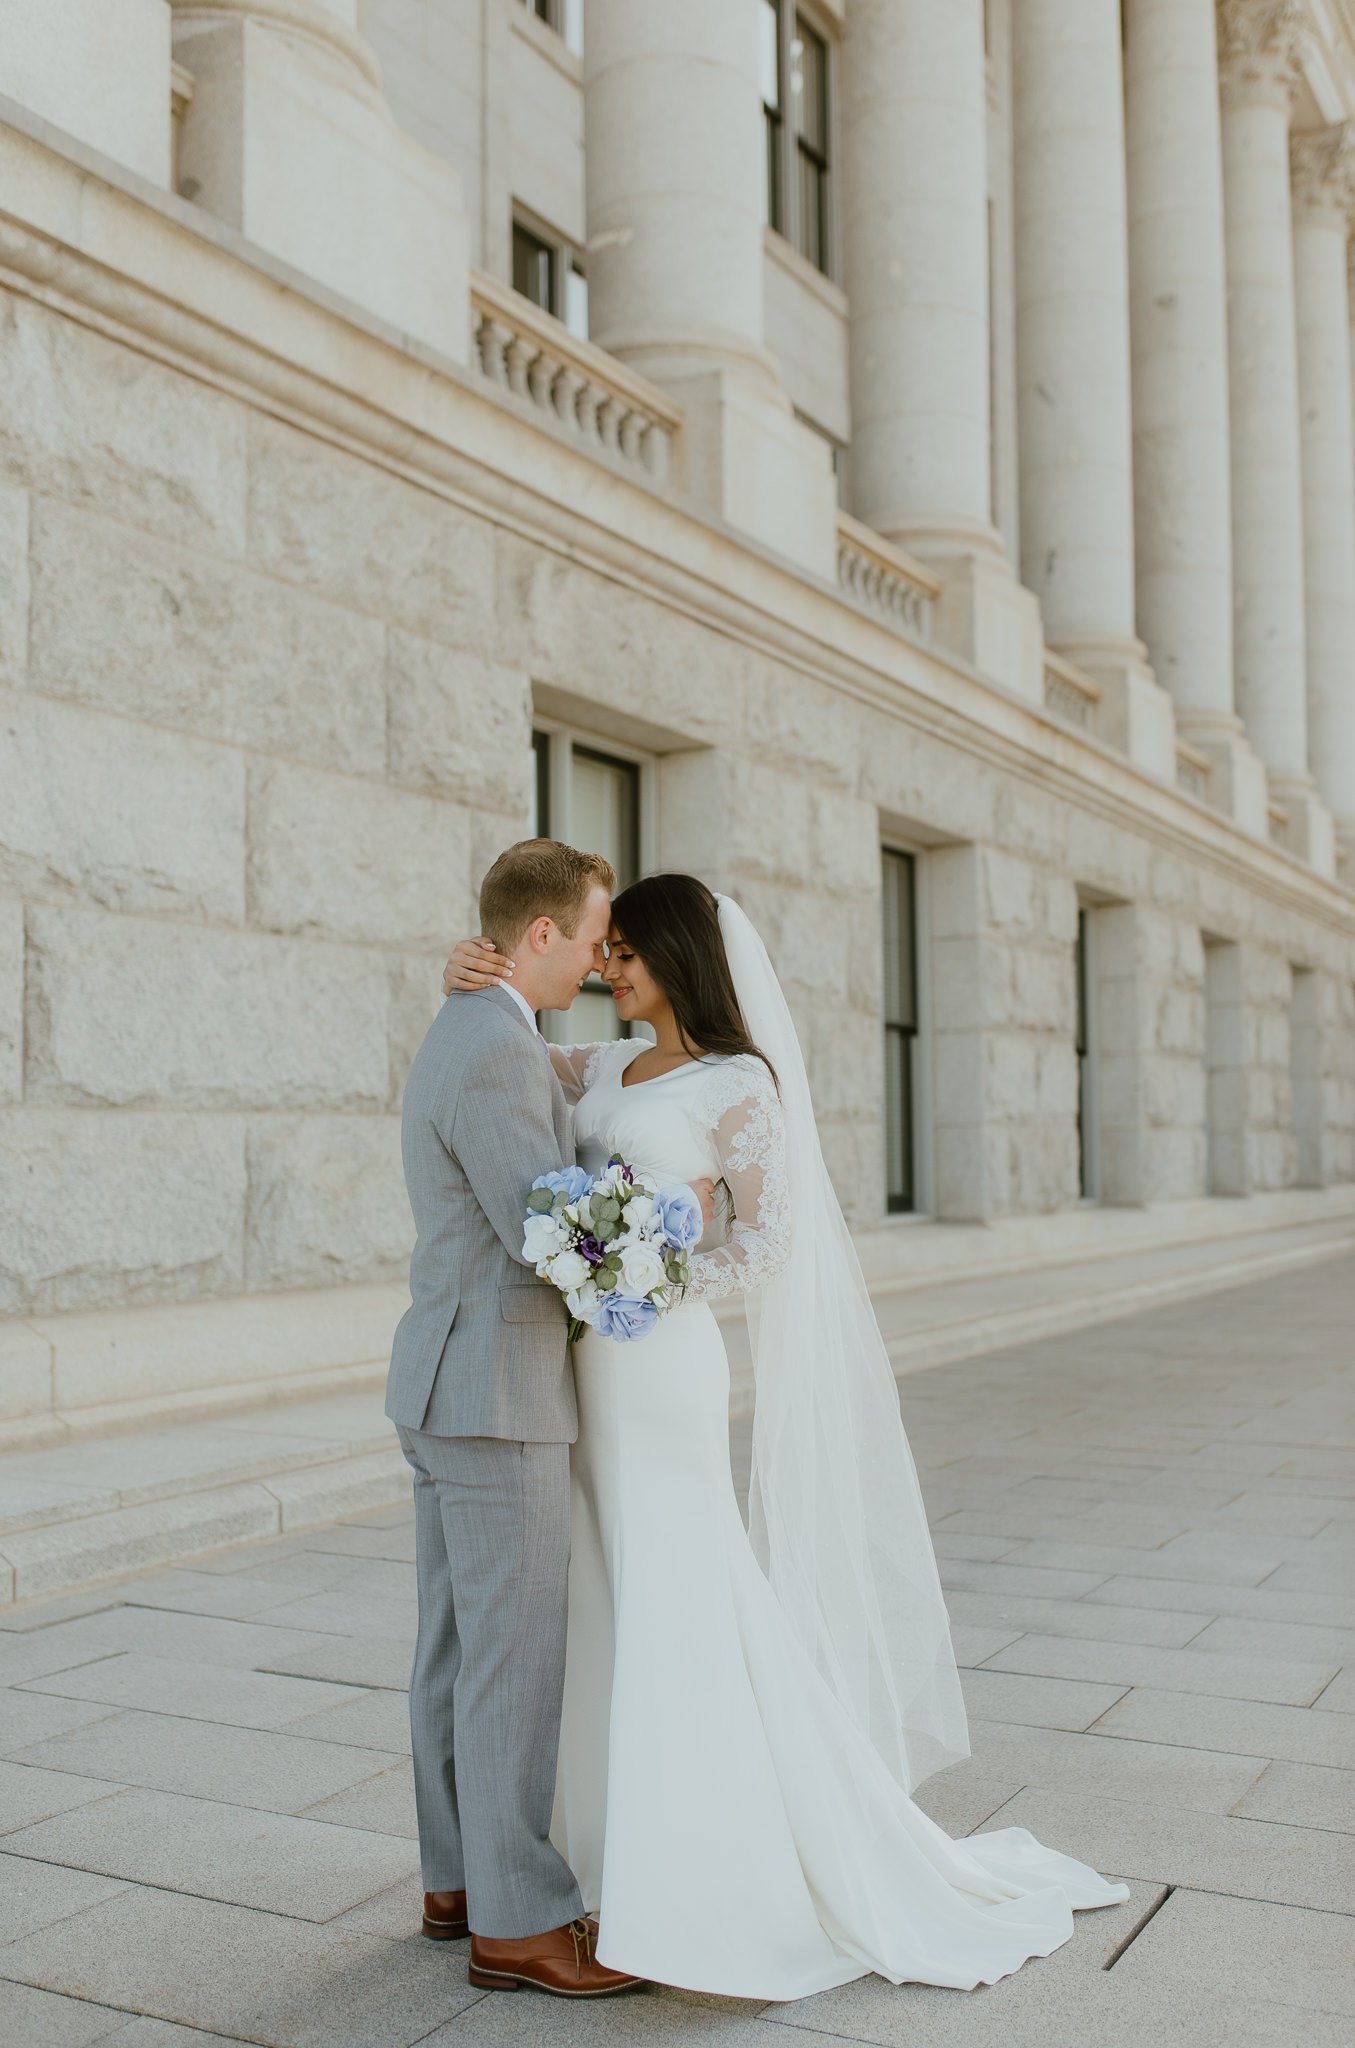 Utah-State-Capitol-Spring-Blossons-Bountiful-LDS-Wedding-Hopesandcheers-photo-10